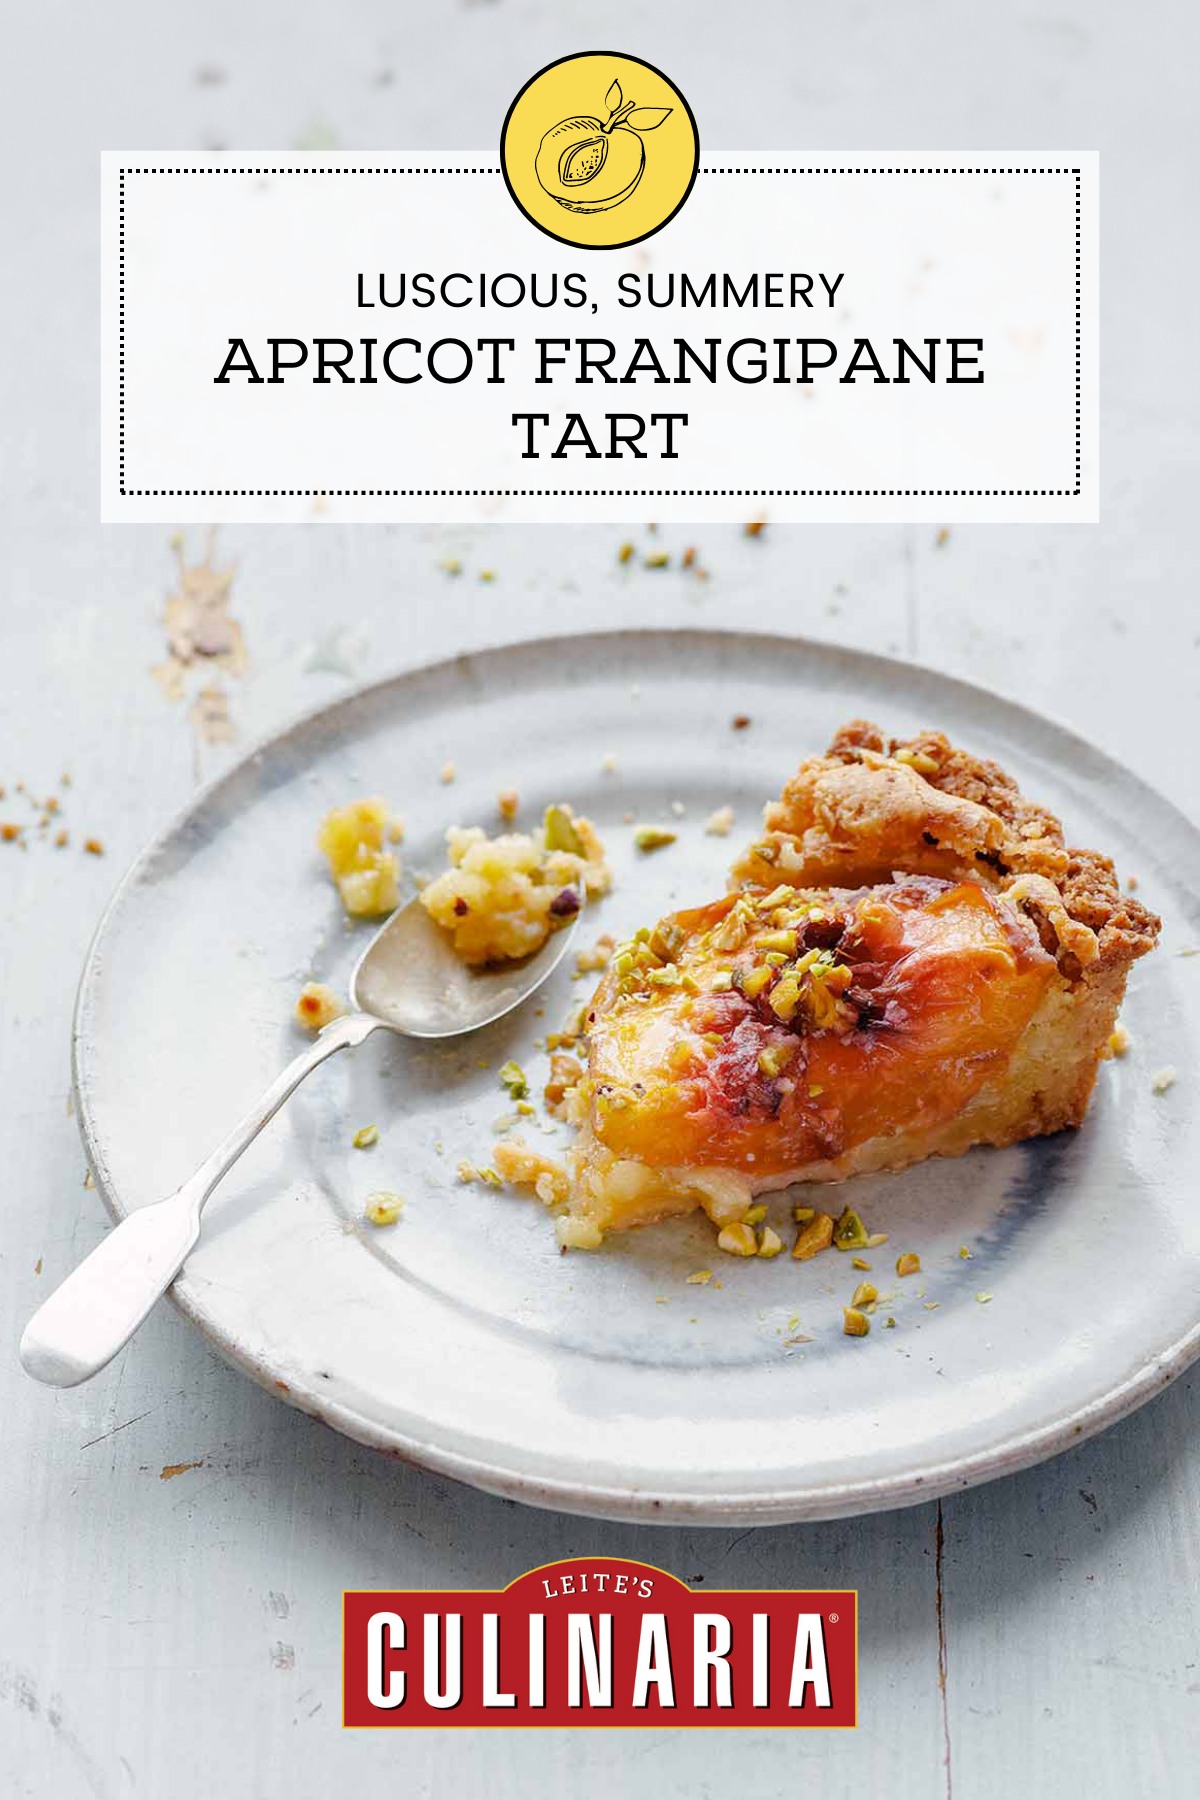 Plate with an slice of apricot tart filled with frangipane and topped with chopped pistachios.